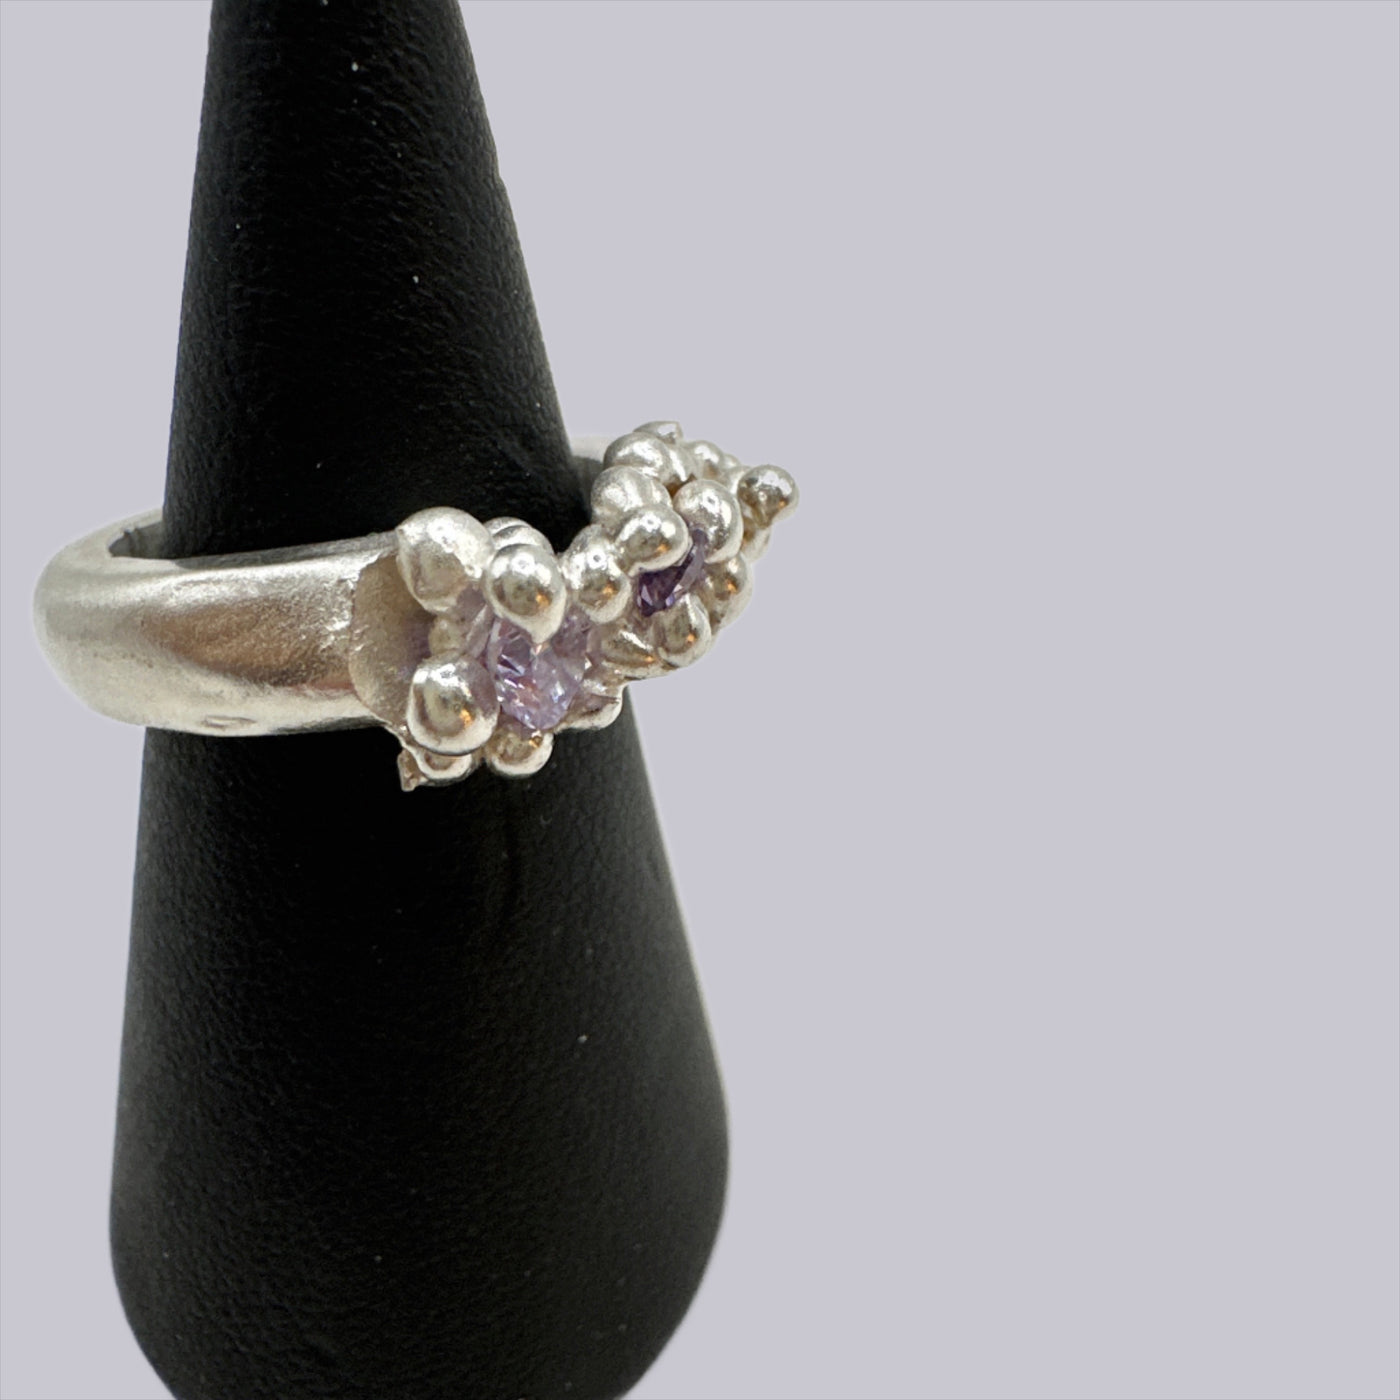 Wax lost granulation silver ring with violet cubic zirconia incapsulated